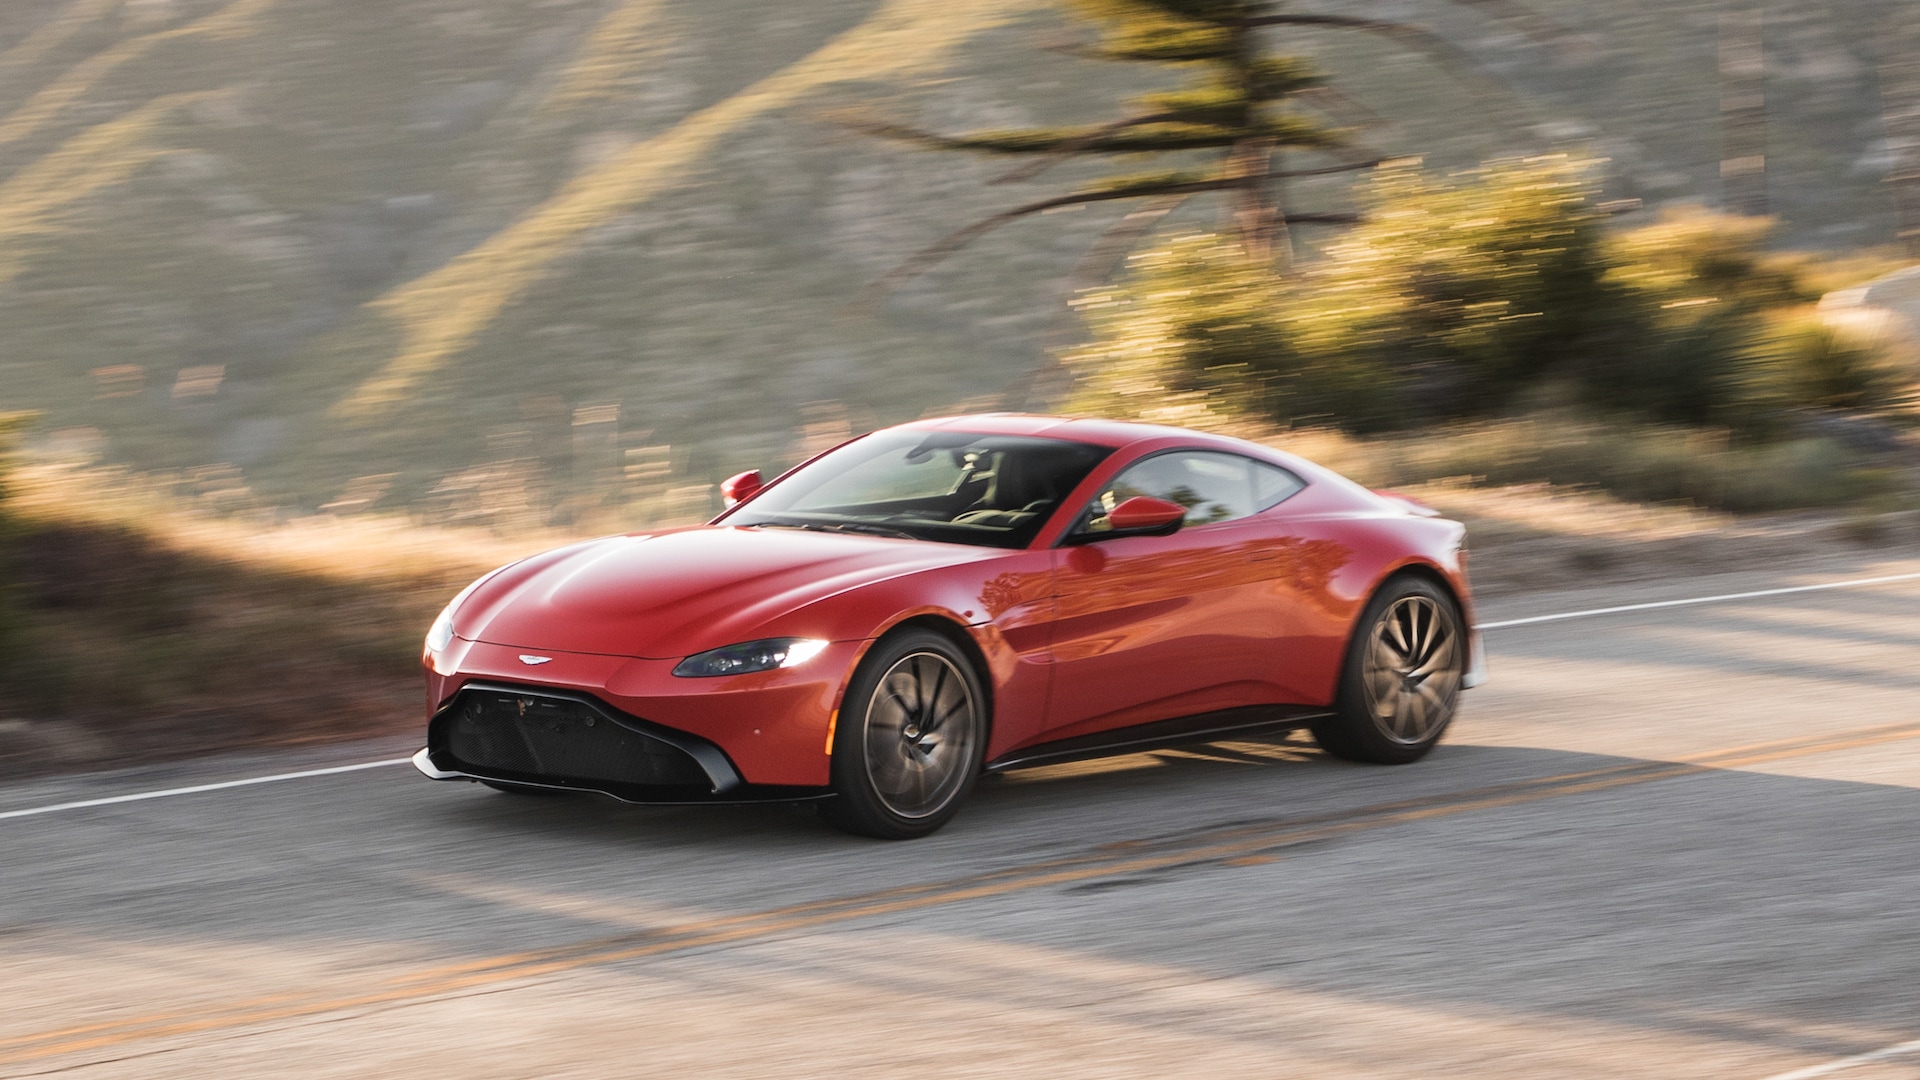 2020 Aston Martin Vantage Test Drive: We Need More Tasty Cars Like This on  the Road